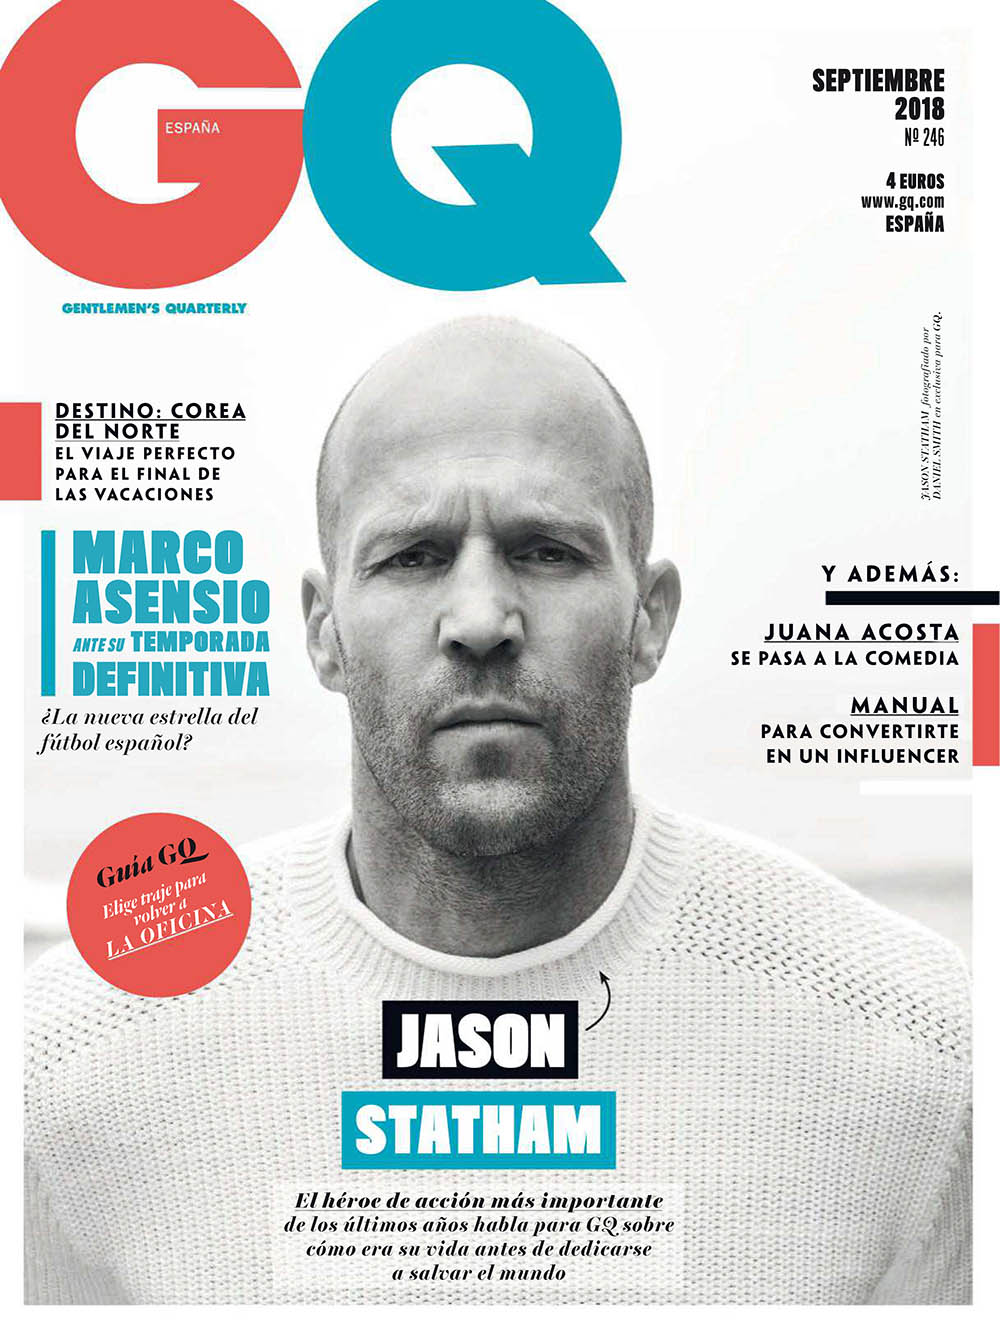 Jason Statham covers GQ Germany and GQ Spain September 2018 by Daniel Smith